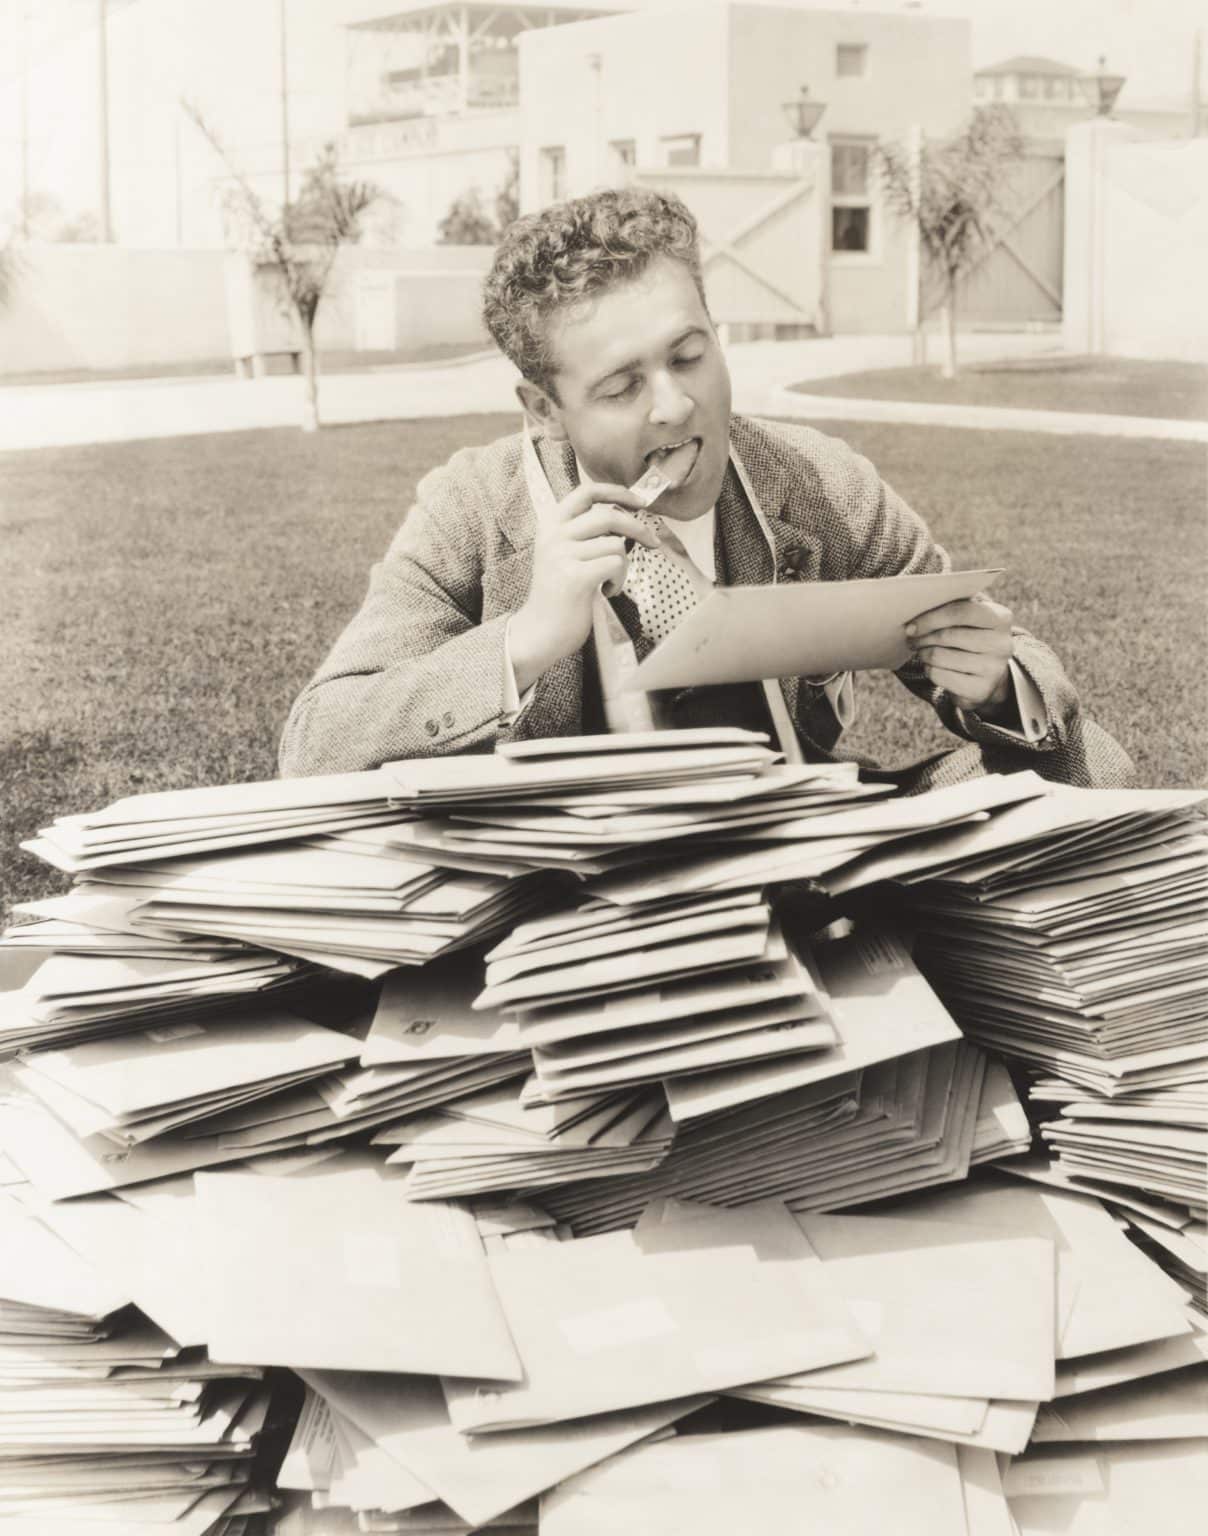 man reading a pile of letters - a metaphor for email engagement